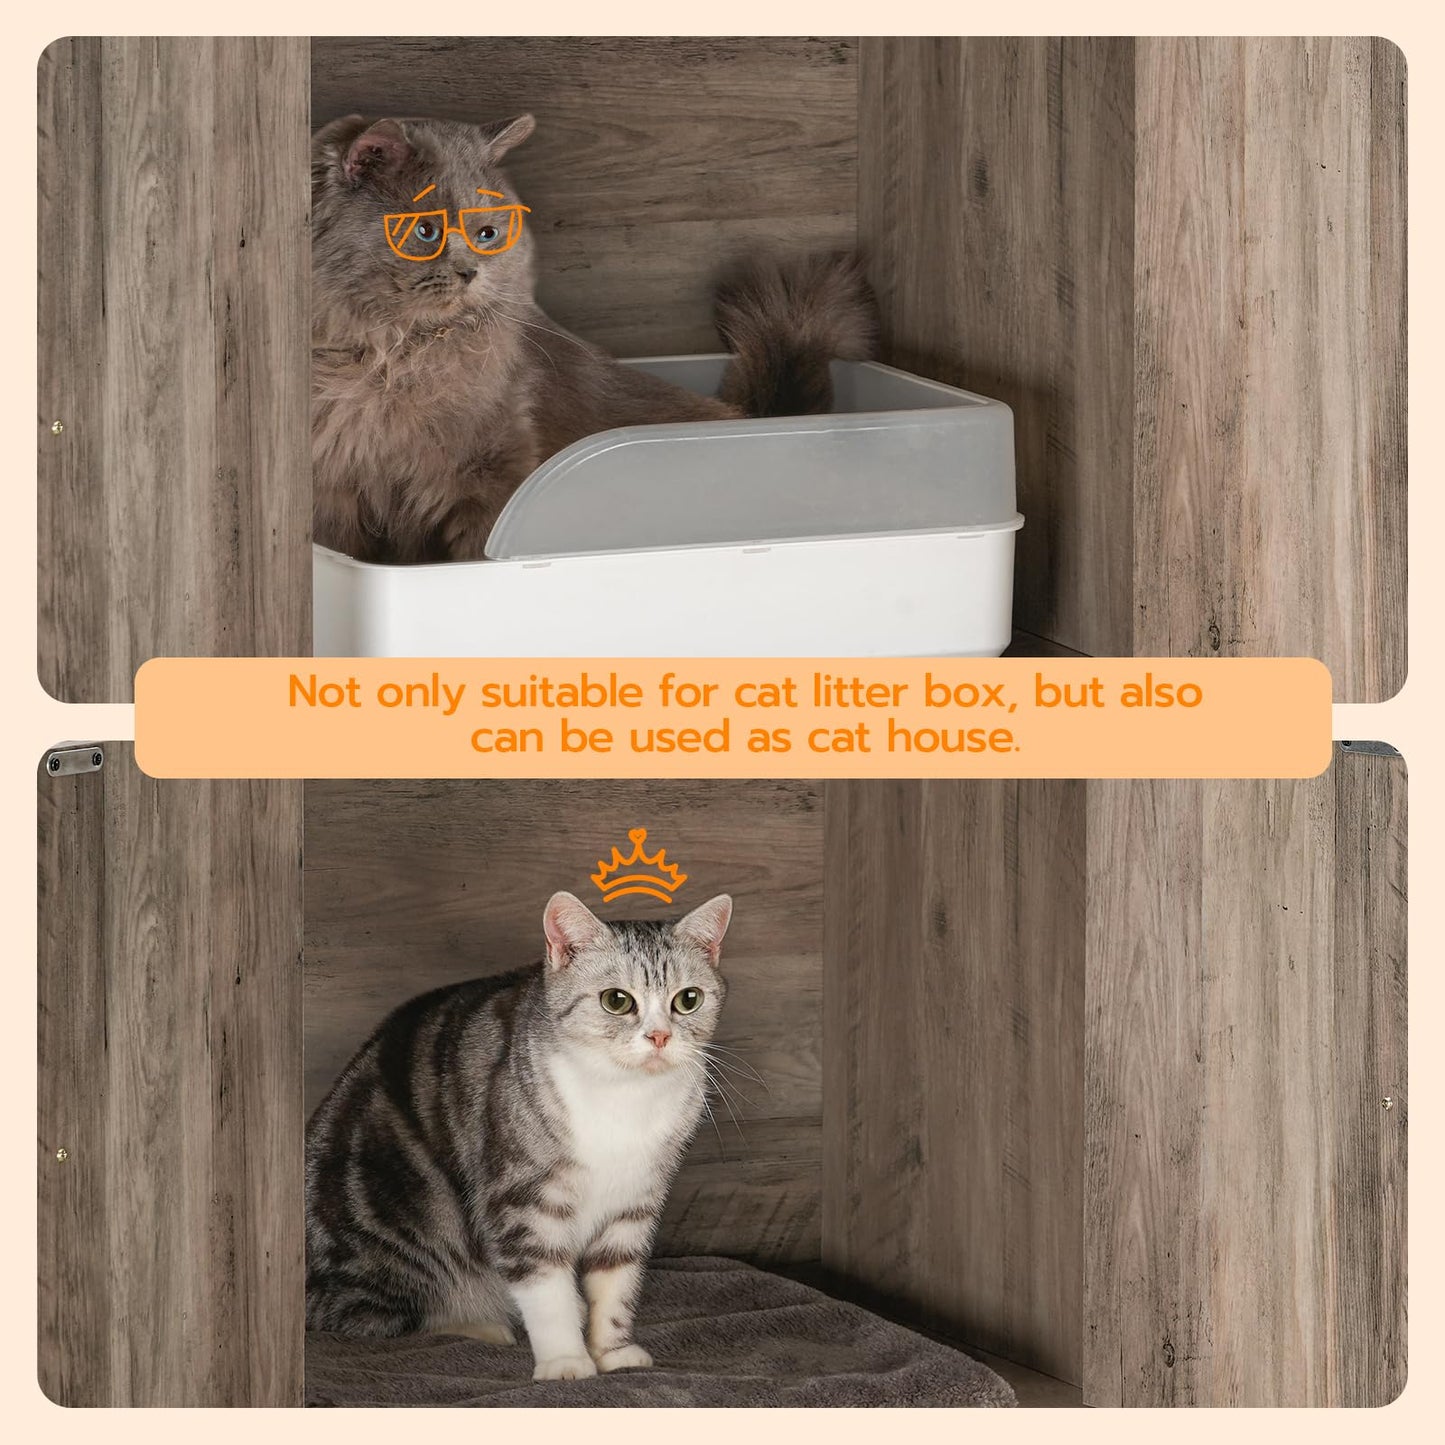 HOOBRO Litter Box Enclosure with Shelves, Wooden Cat Litter Box Furniture, Large Hidden Litter Box with Doors, Storage Cabinet, for Most of Litter Box, 23.6" x 17.7" x 47.2", Greige BG62MW01